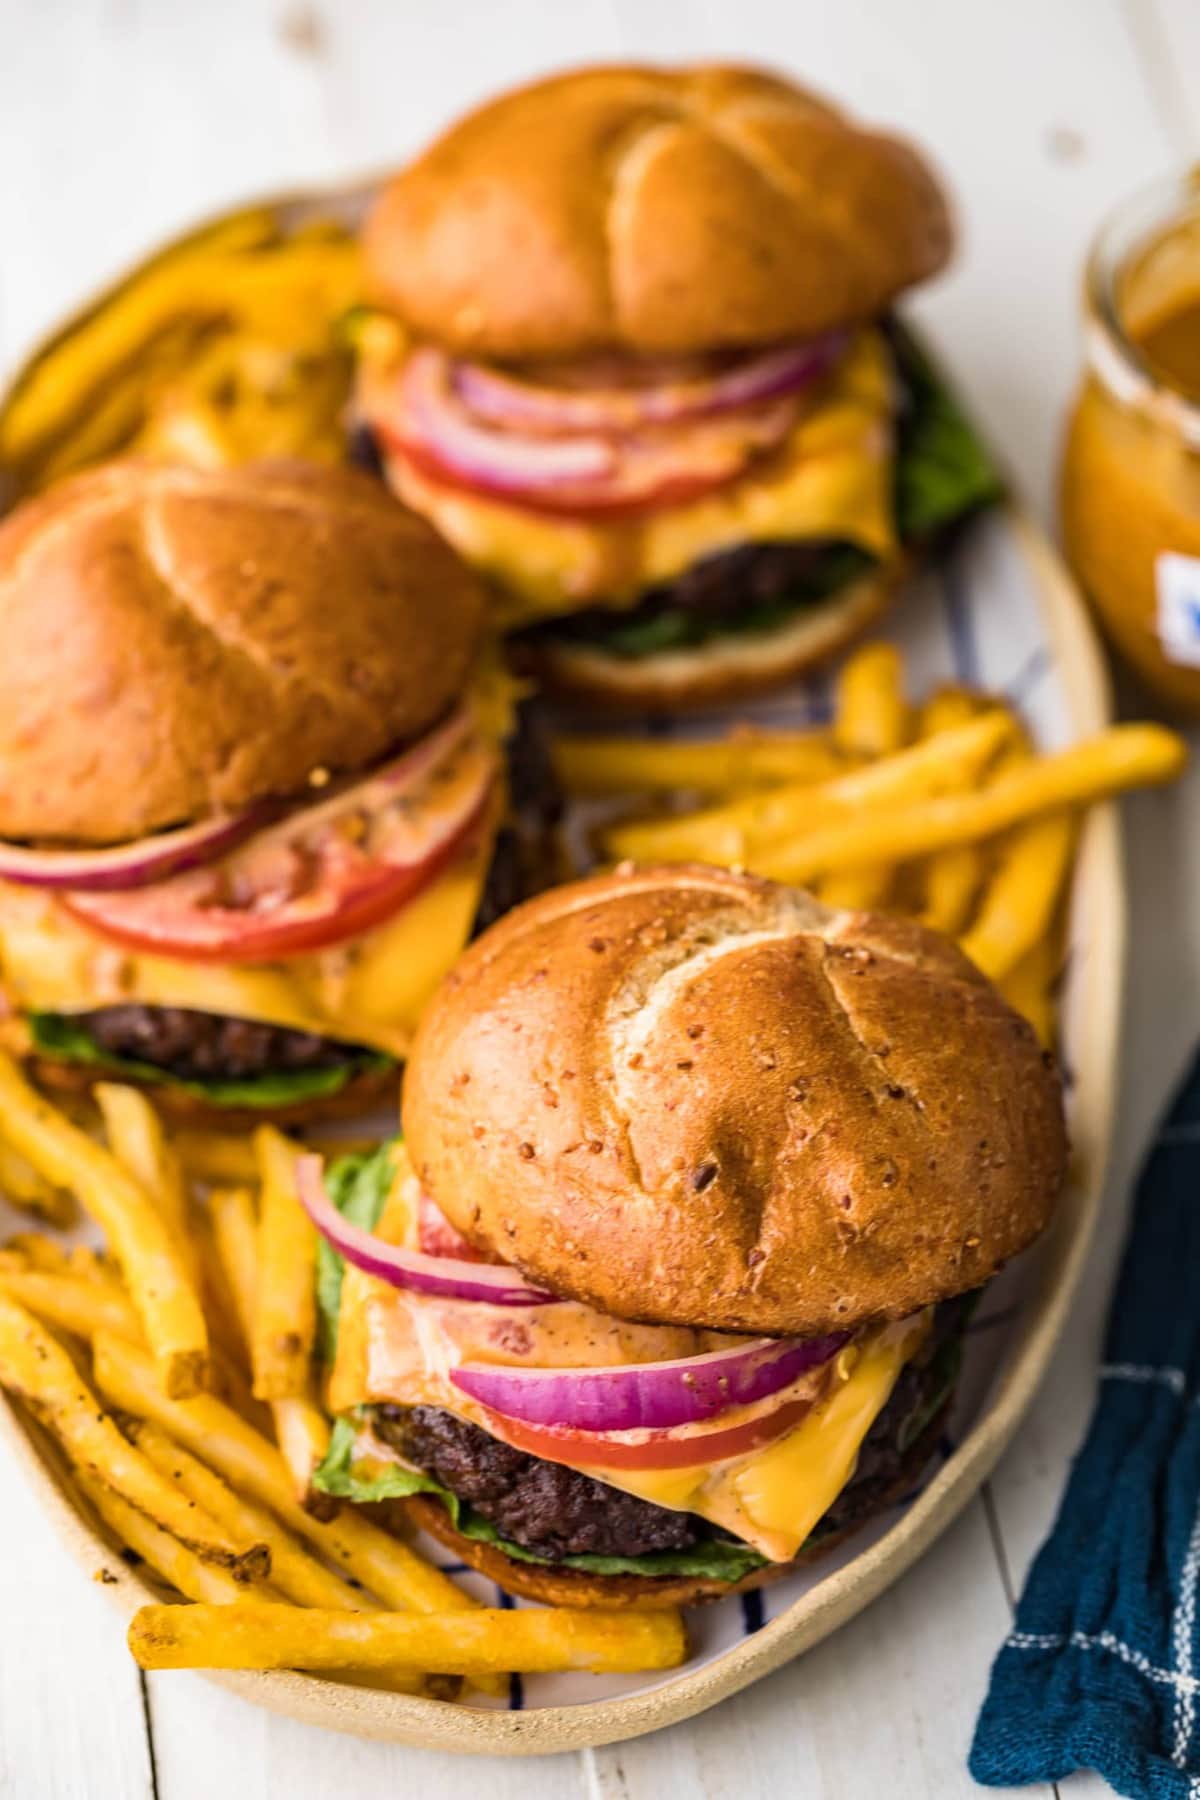 Three juicy grilled burgers served with fries